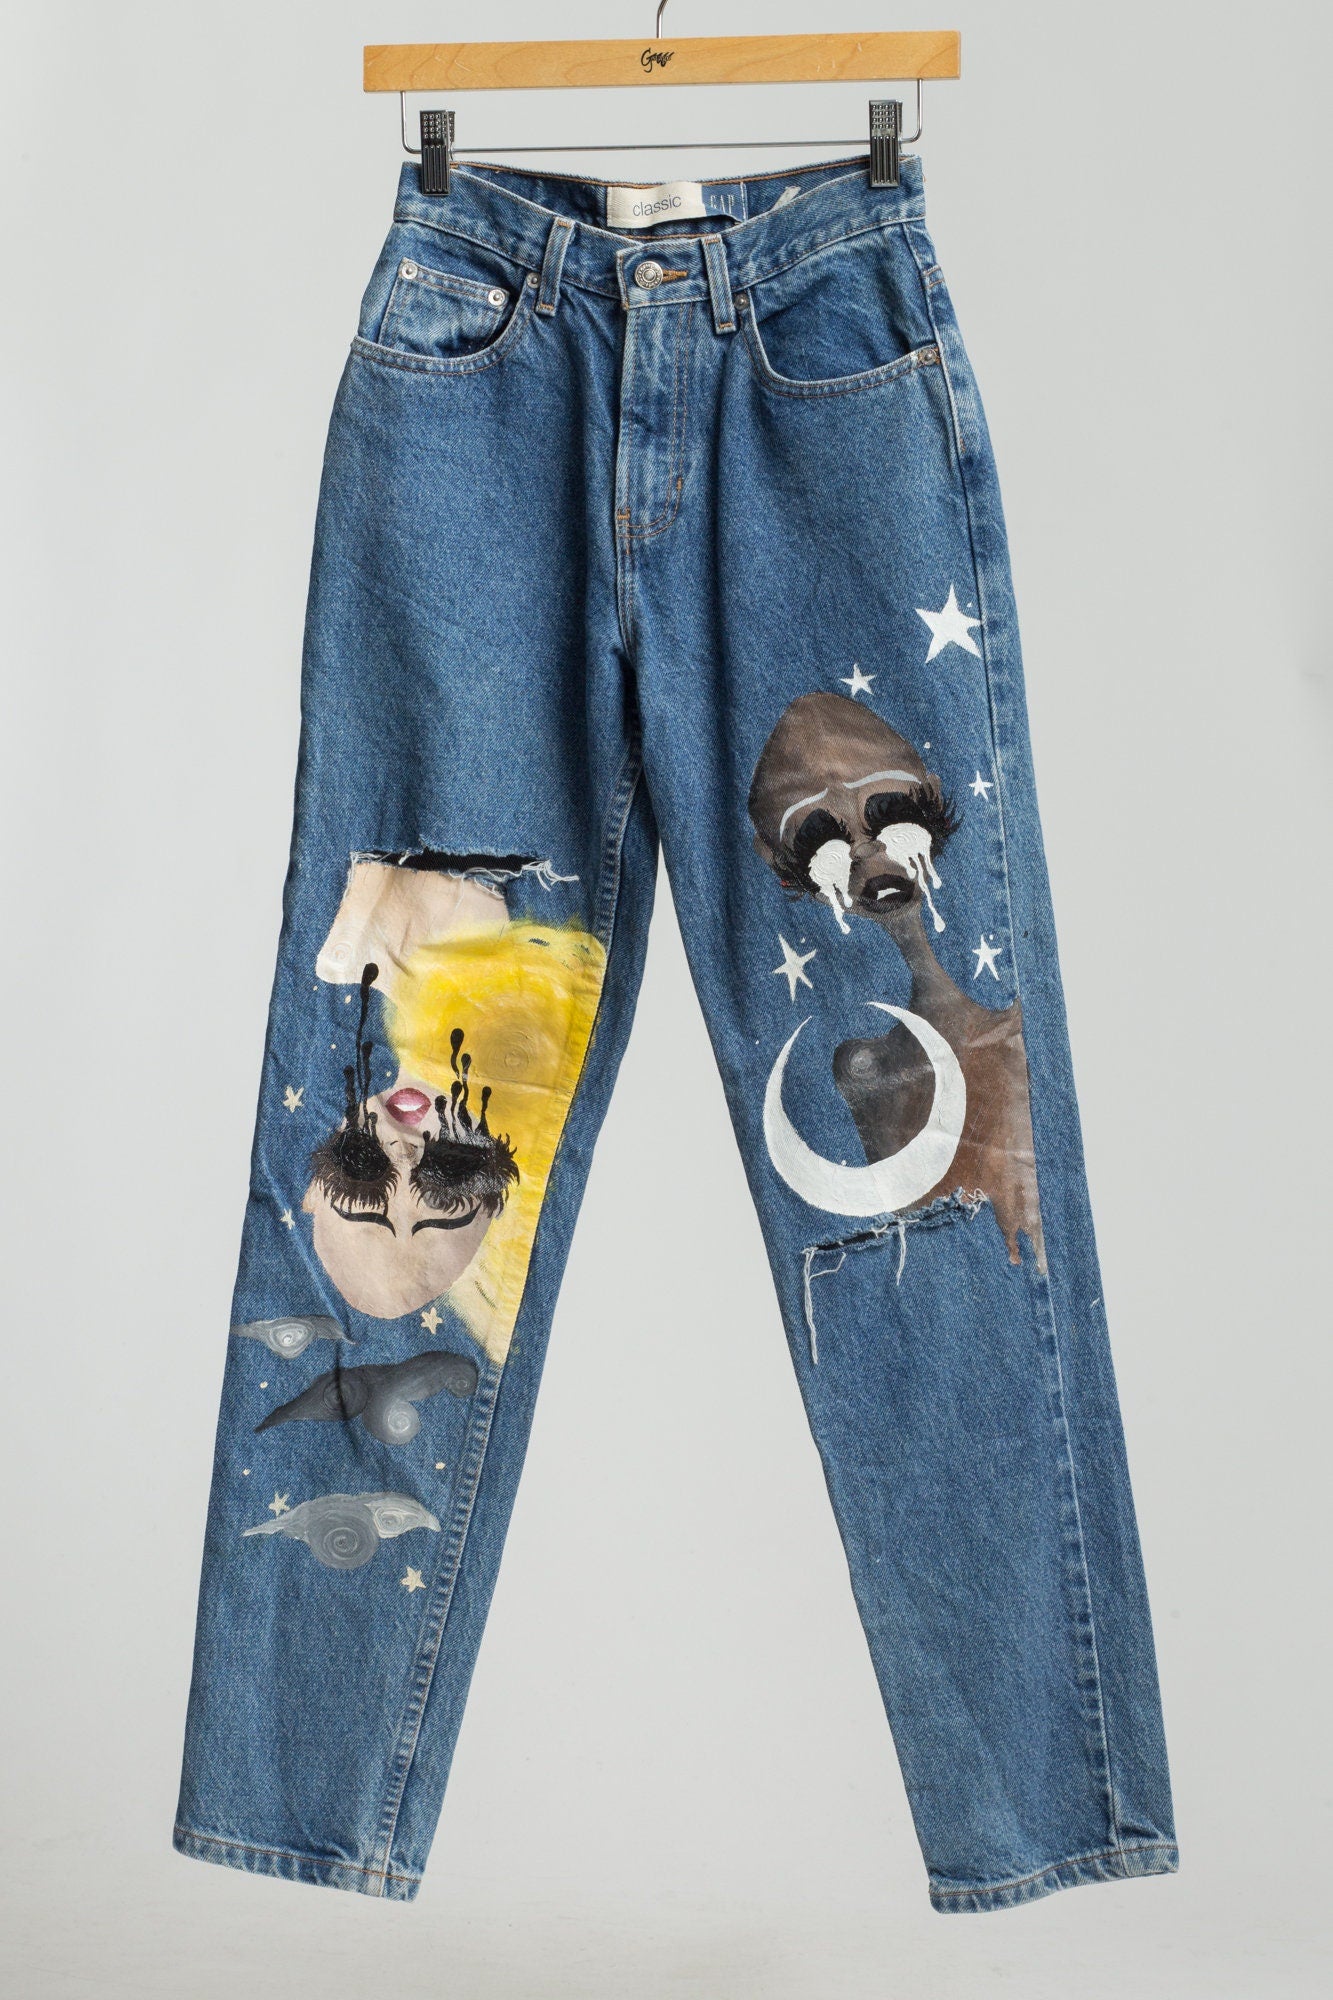 Celestial Women Sun & Moon Painted Jeans - Extra Small, 24"" 